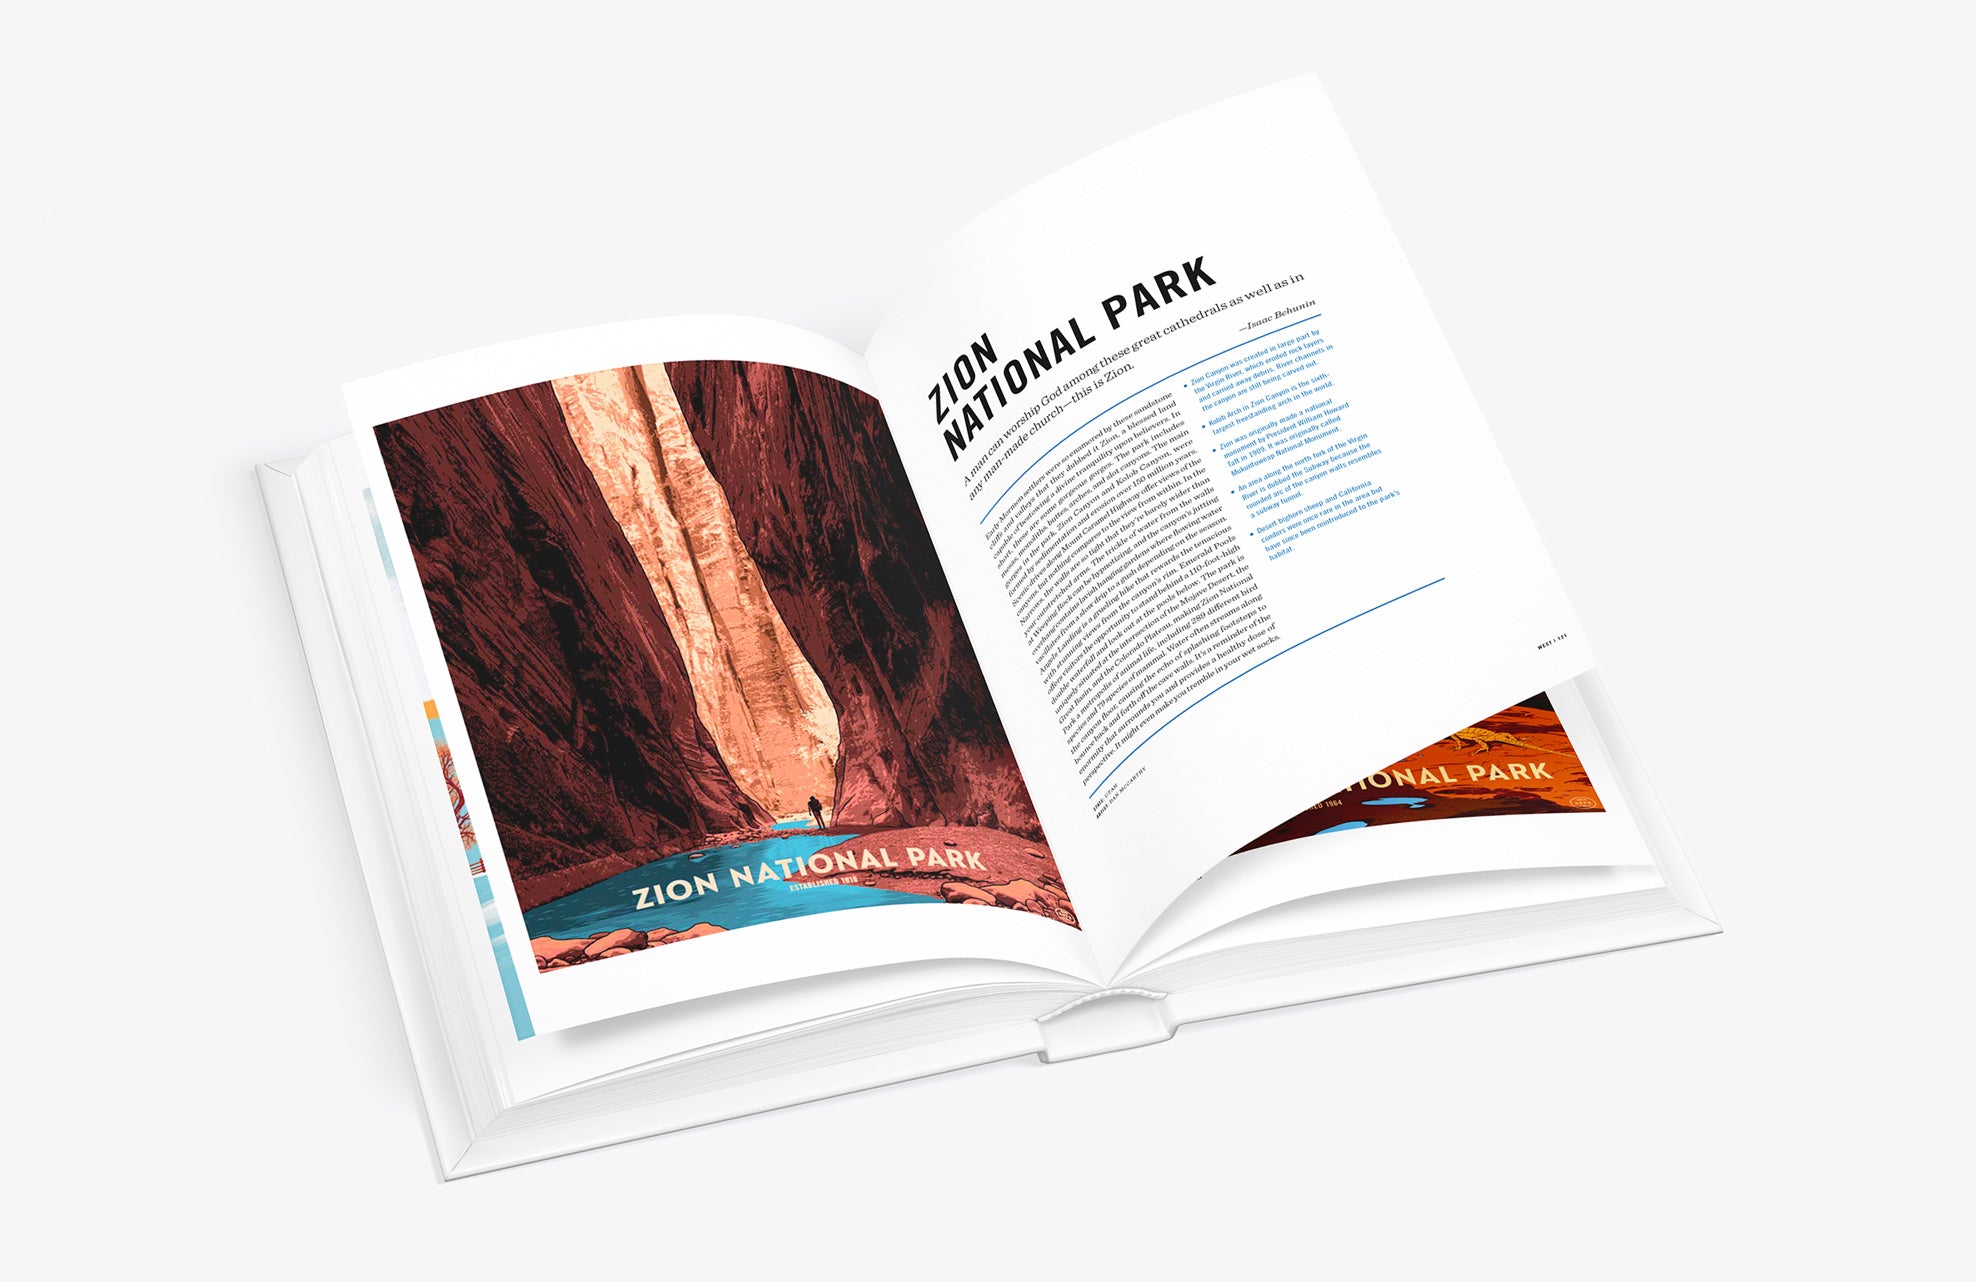 Art of the National Parks by Fifty-Nine Parks book Zion